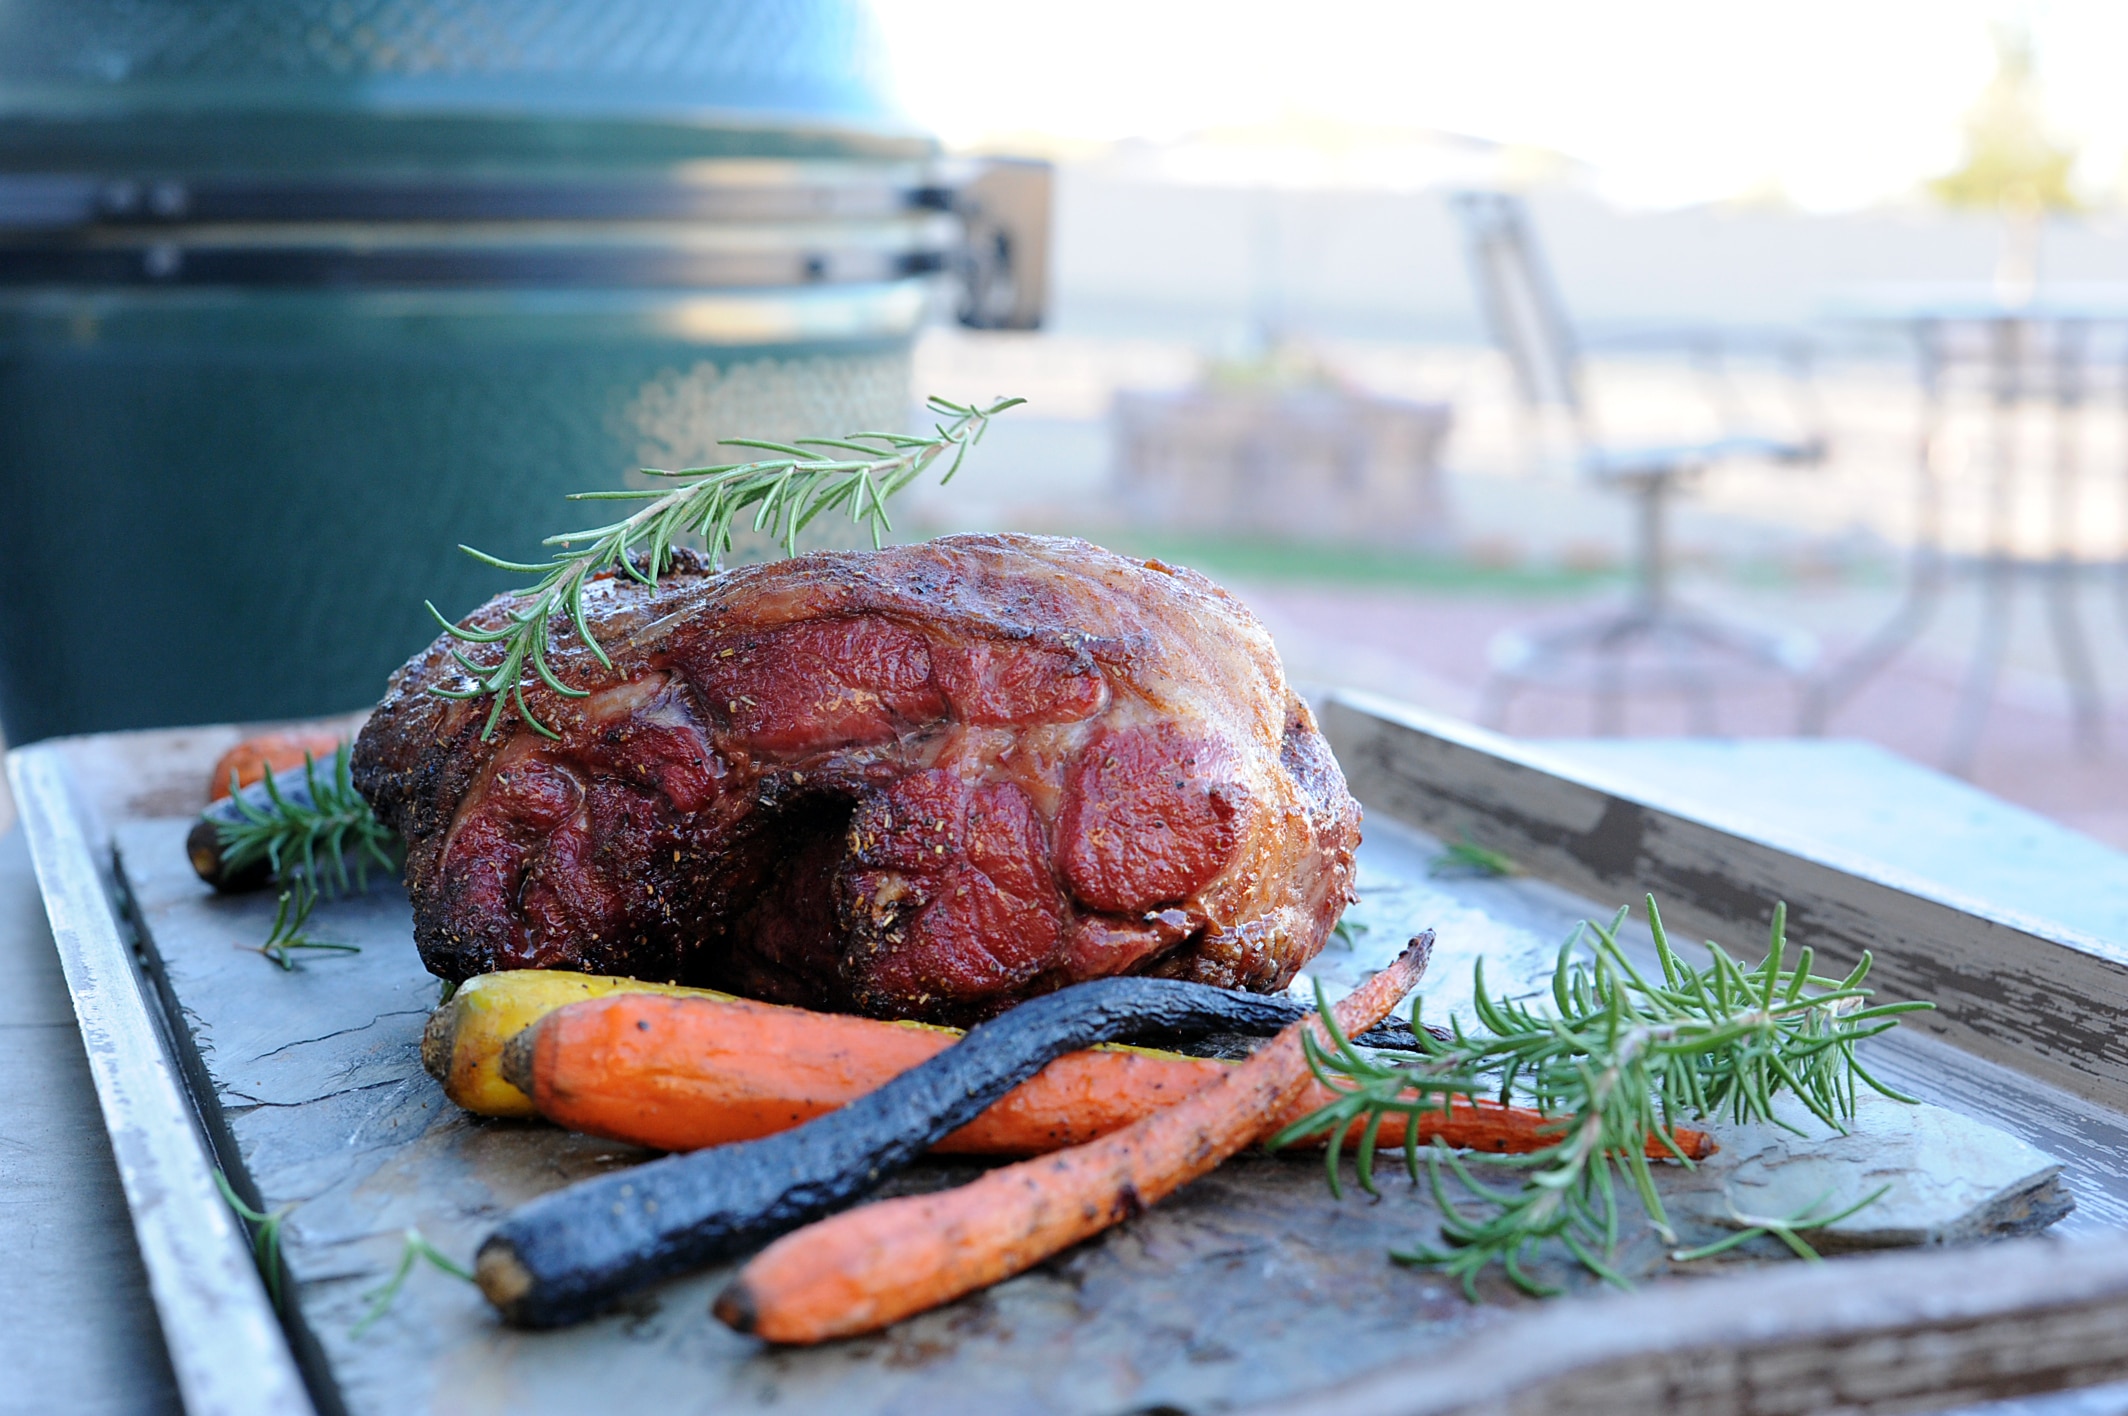 Roasted leg of lamb setting on table with carrots by grill